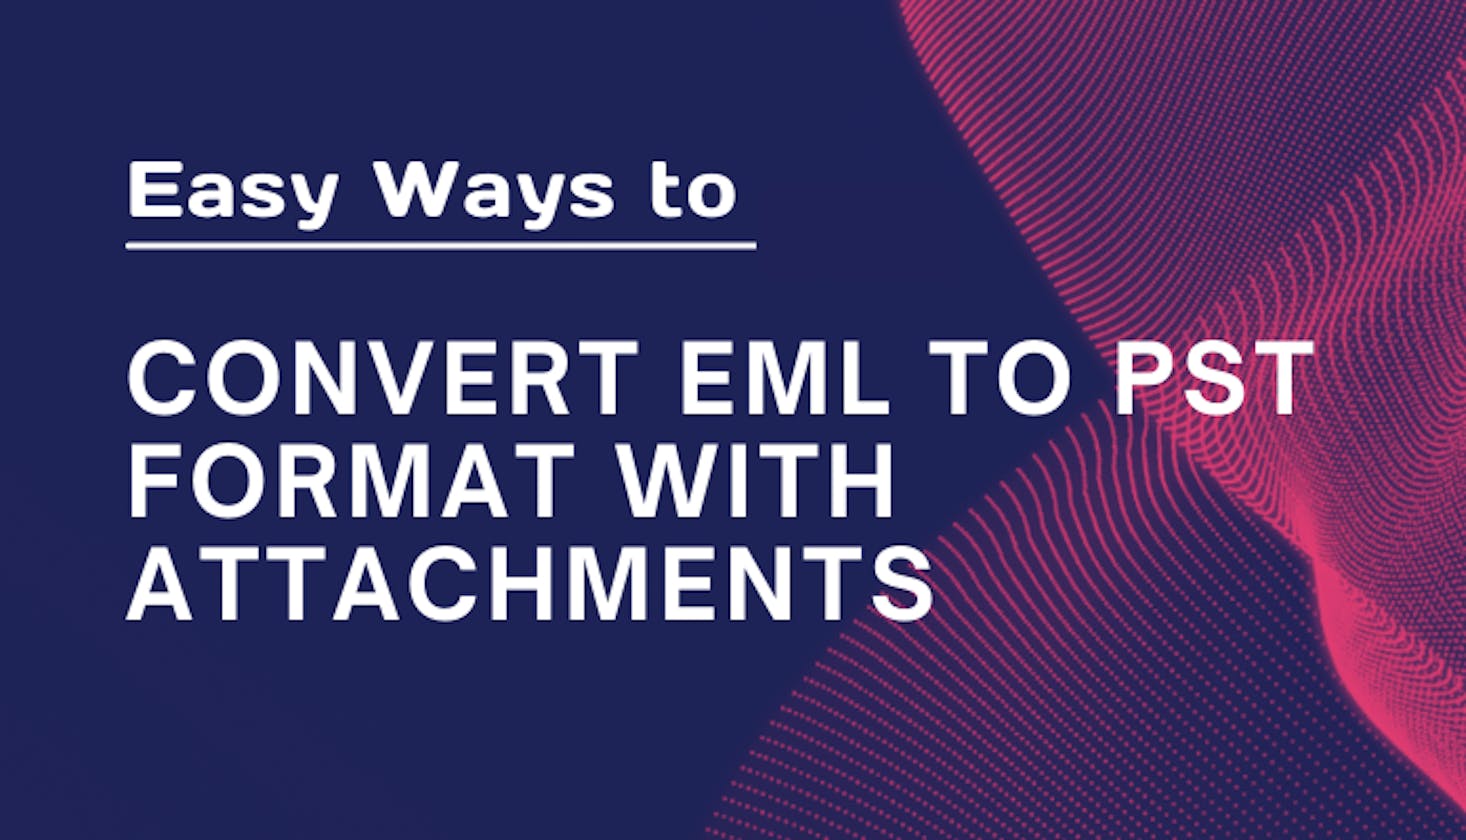 Easy Ways to Convert EML to PST Format with Attachments